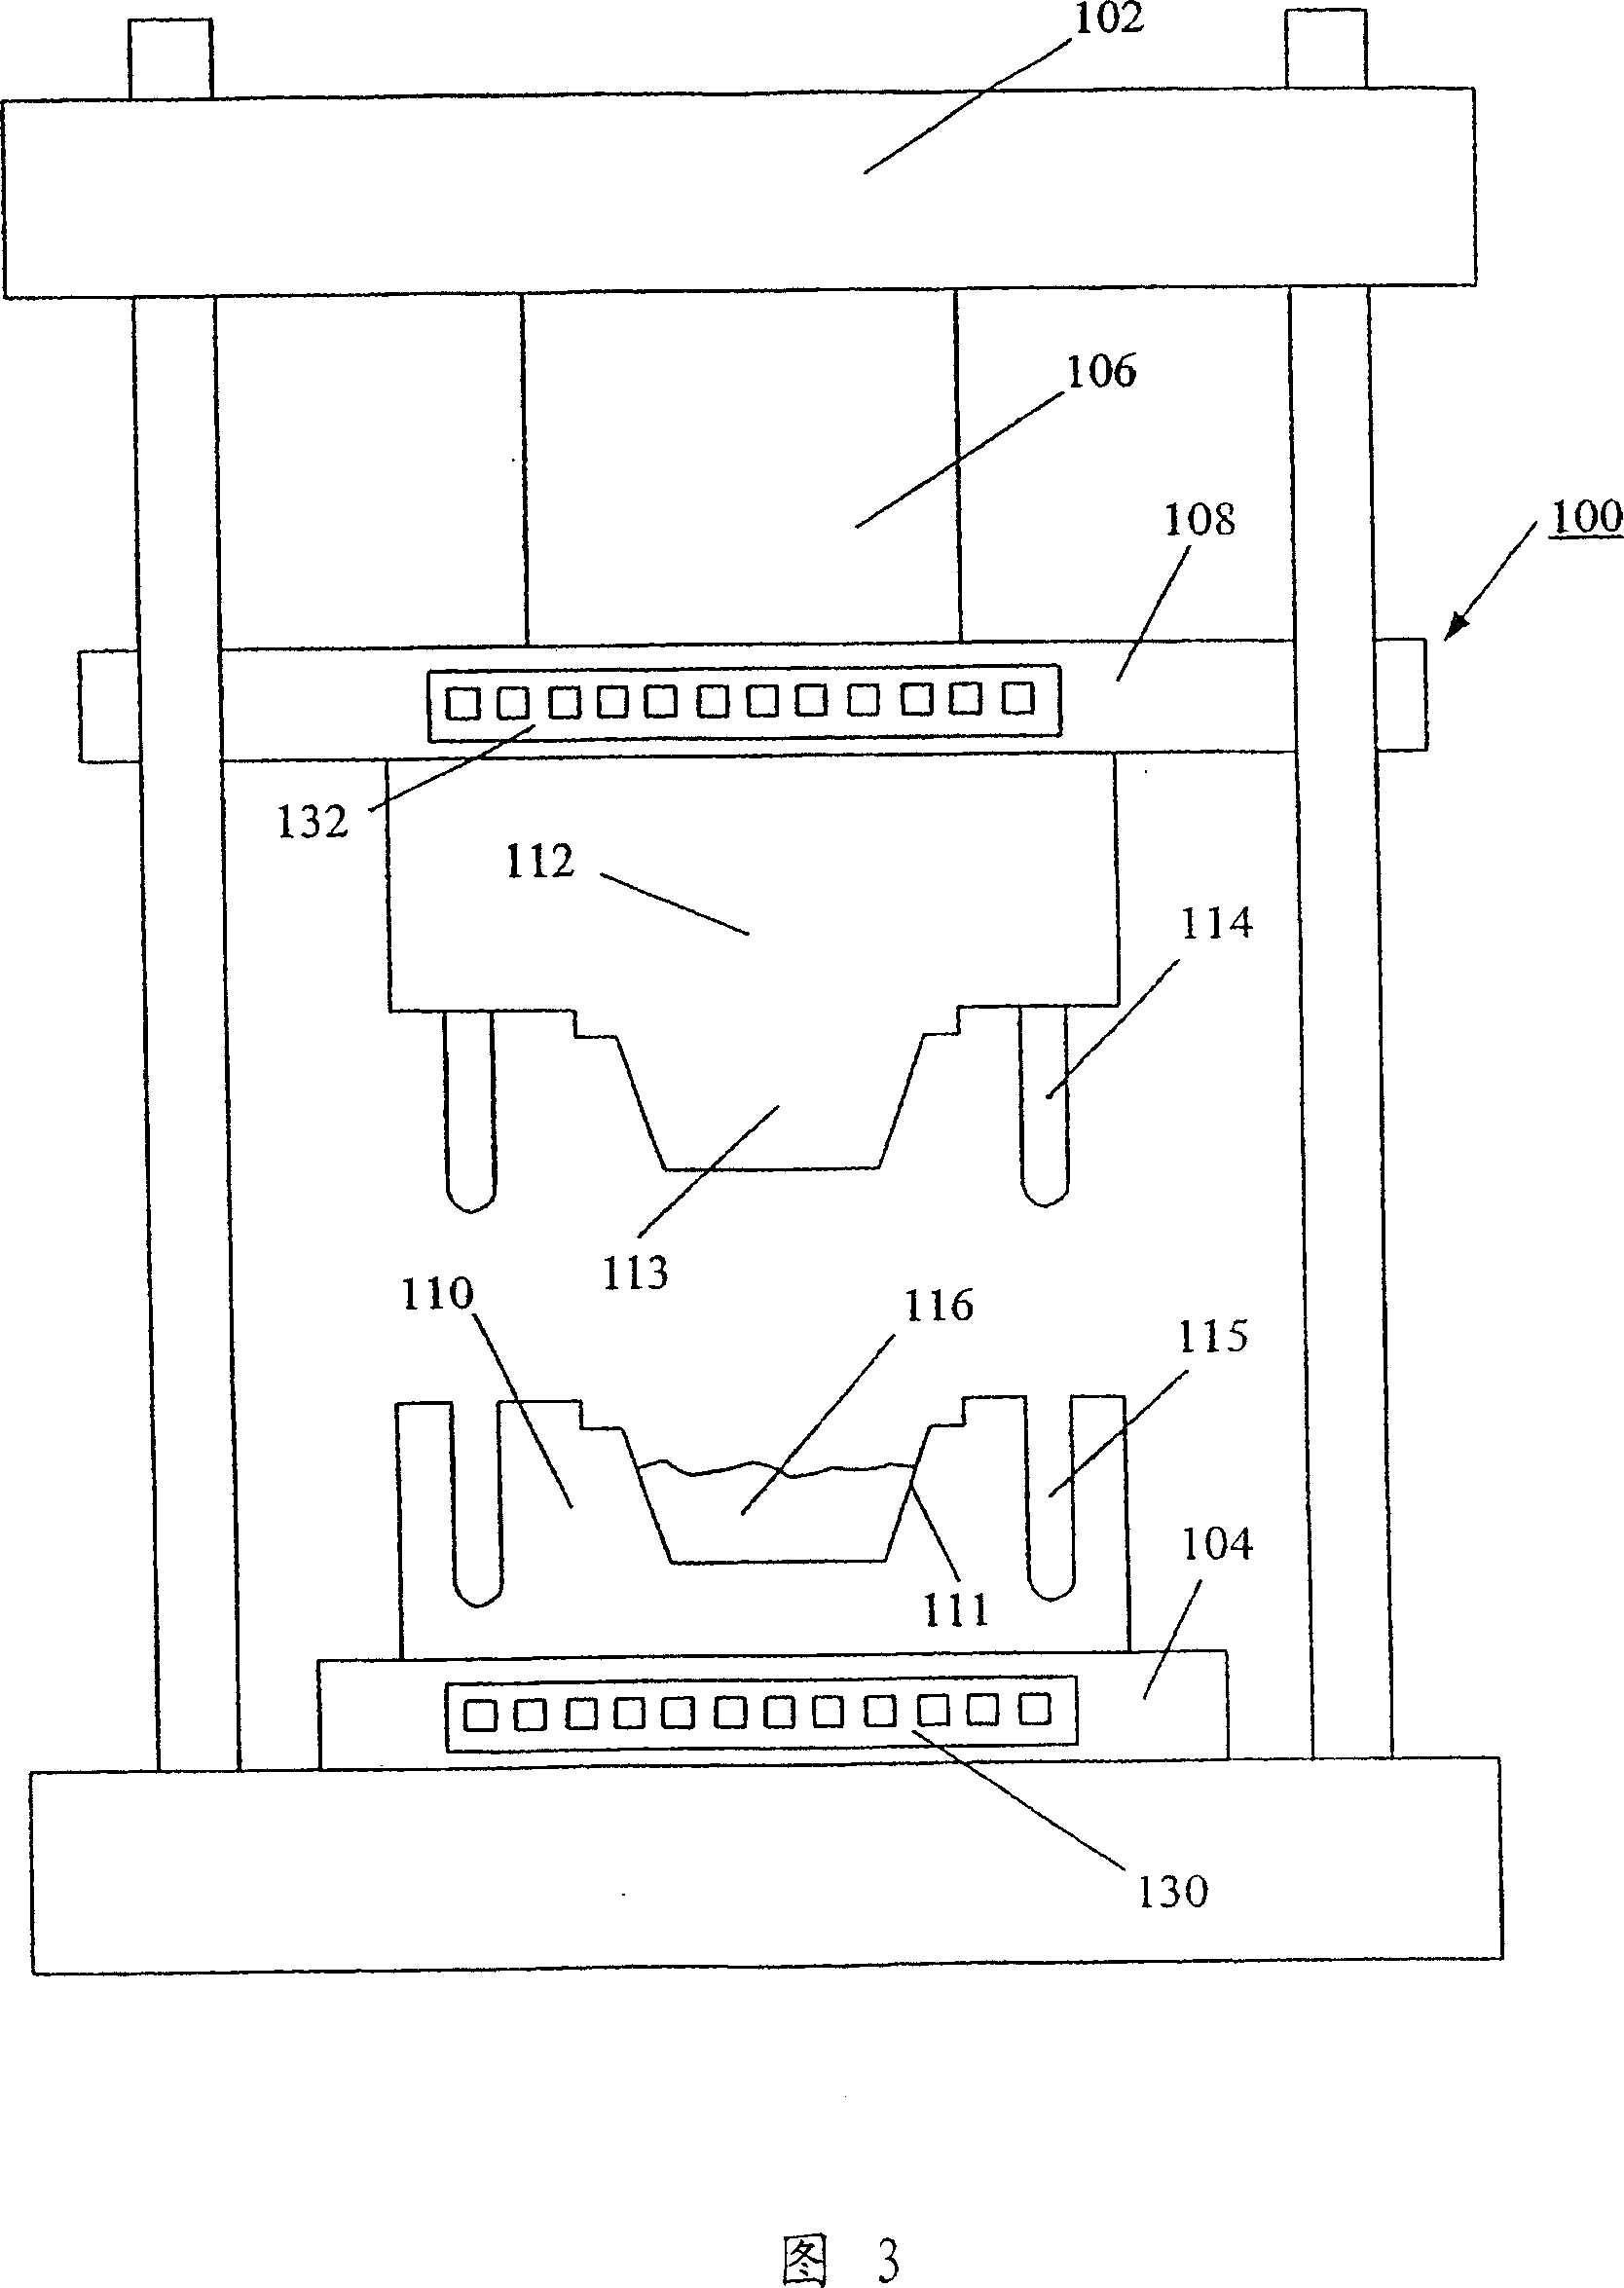 Method for forming high strength mould